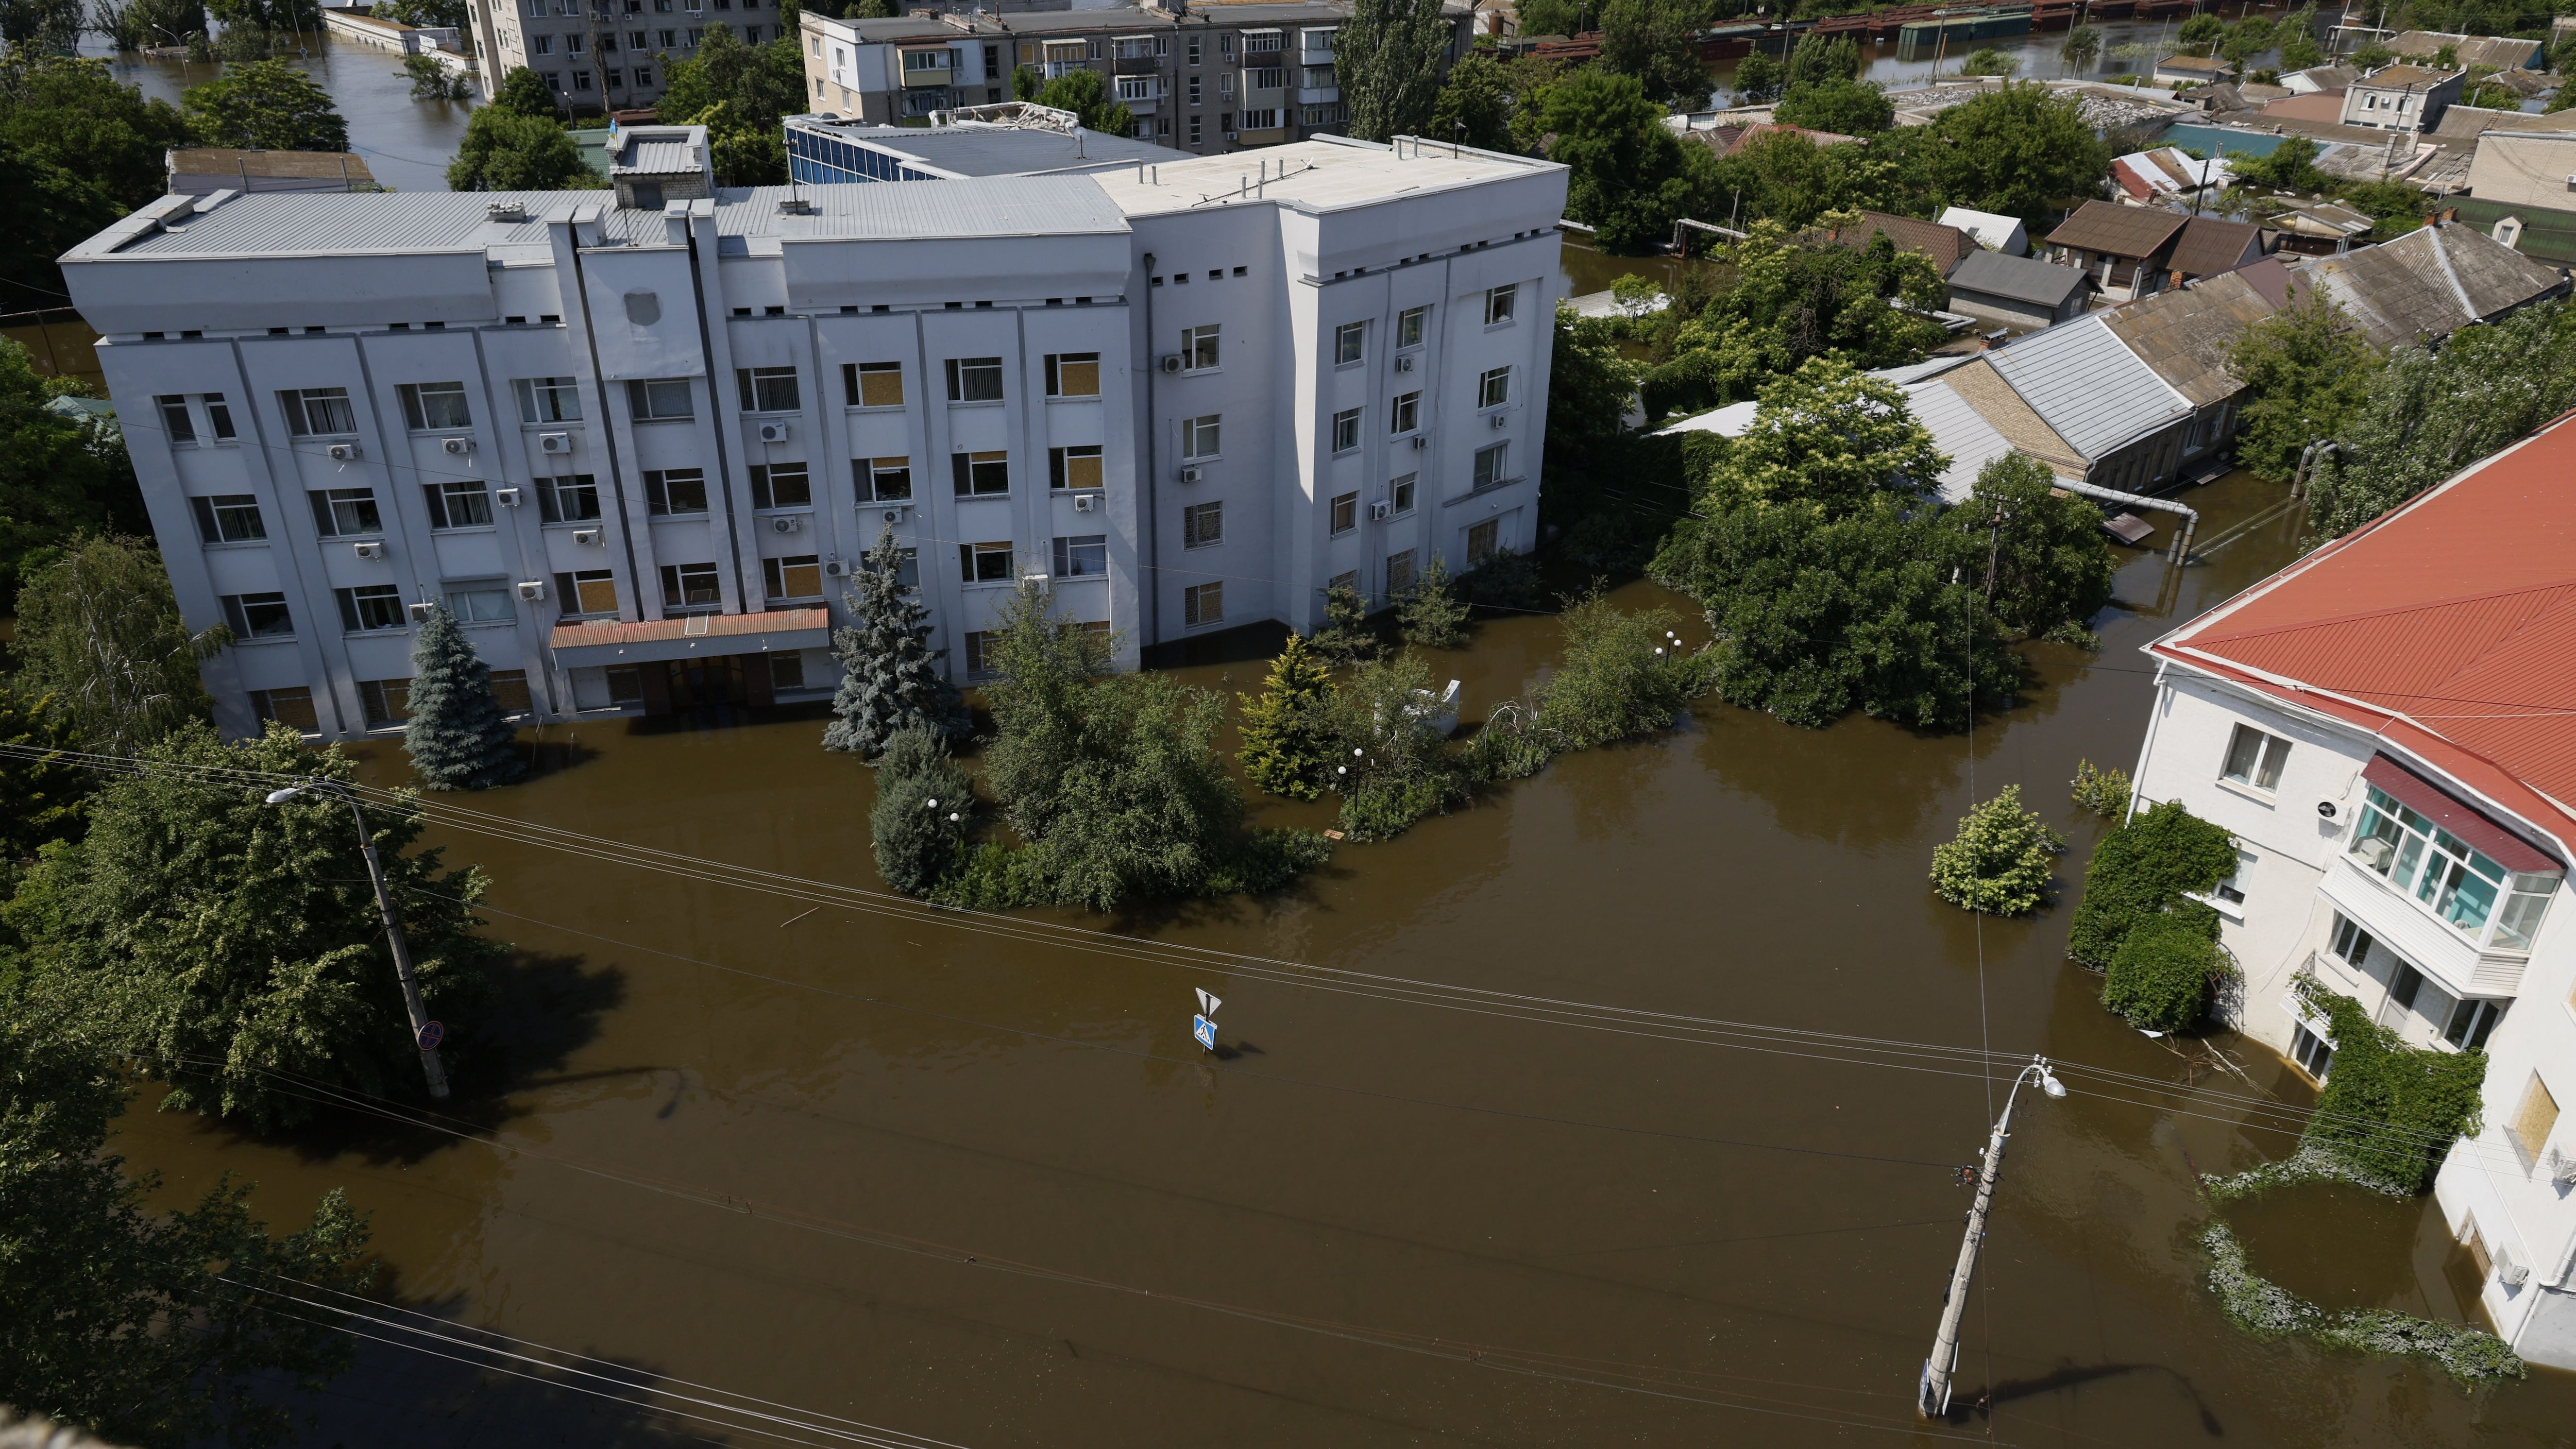 KHERSON, UKRAINE - JUNE 9: A general view of a flooded square on June 9, 2023 in Kherson, Ukraine.  Early Tuesday, the Kakhovka dam and hydroelectric power plant, which sit on the Dnipro river in the southern Kherson region, were destroyed, forcing downstream communities to evacuate do to risk of flooding. The cause of the dam's collapse is not yet confirmed, with Russia and Ukraine accusing each other of its destruction. The Dnipro river has served as a frontline between the warring armies following Russia's retreat from Kherson and surrounding areas last autumn. The dam and plant had been under the control of Russia, which occupies a swath of land south and southeast of the river. (Photo by Alex Babenko/Getty Images)